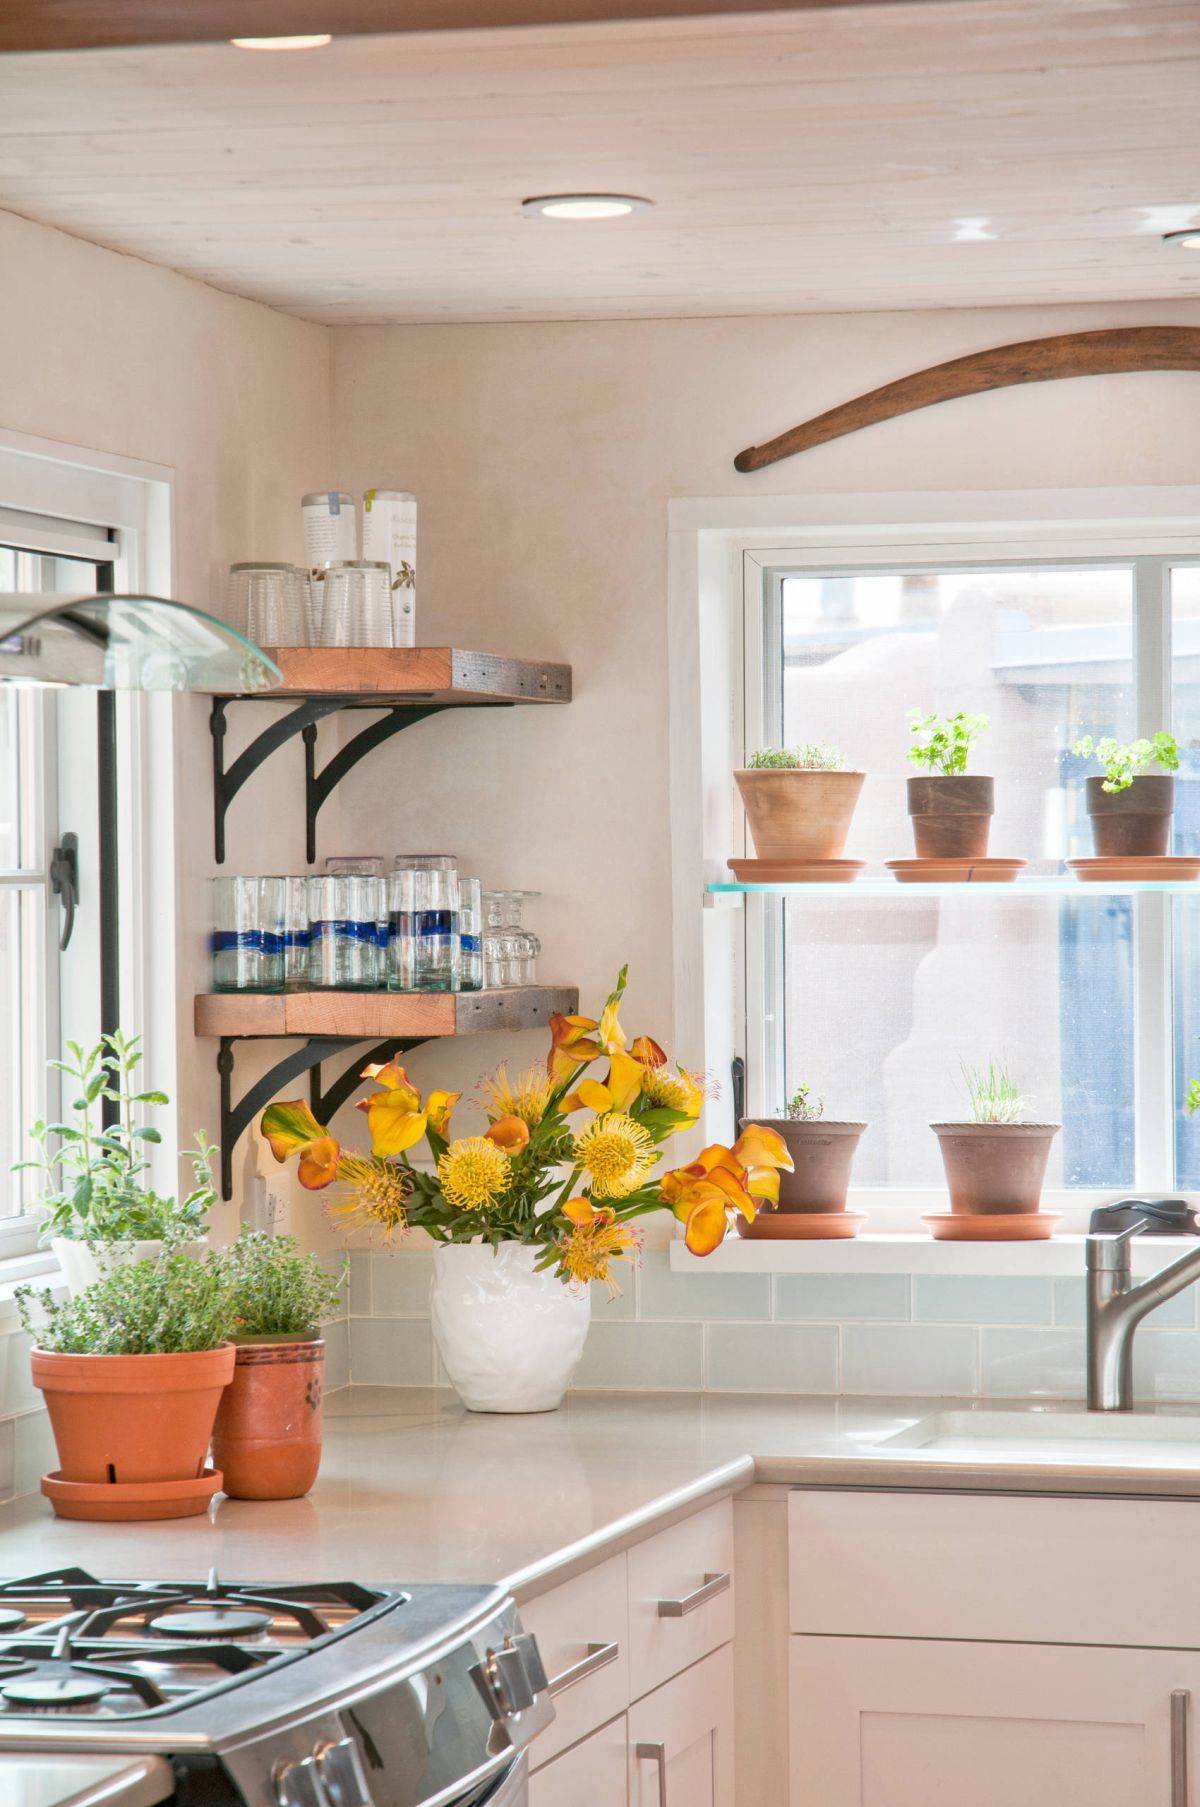 Few things add freshness and cheer to a kitchen like flowering plants and a herb garden